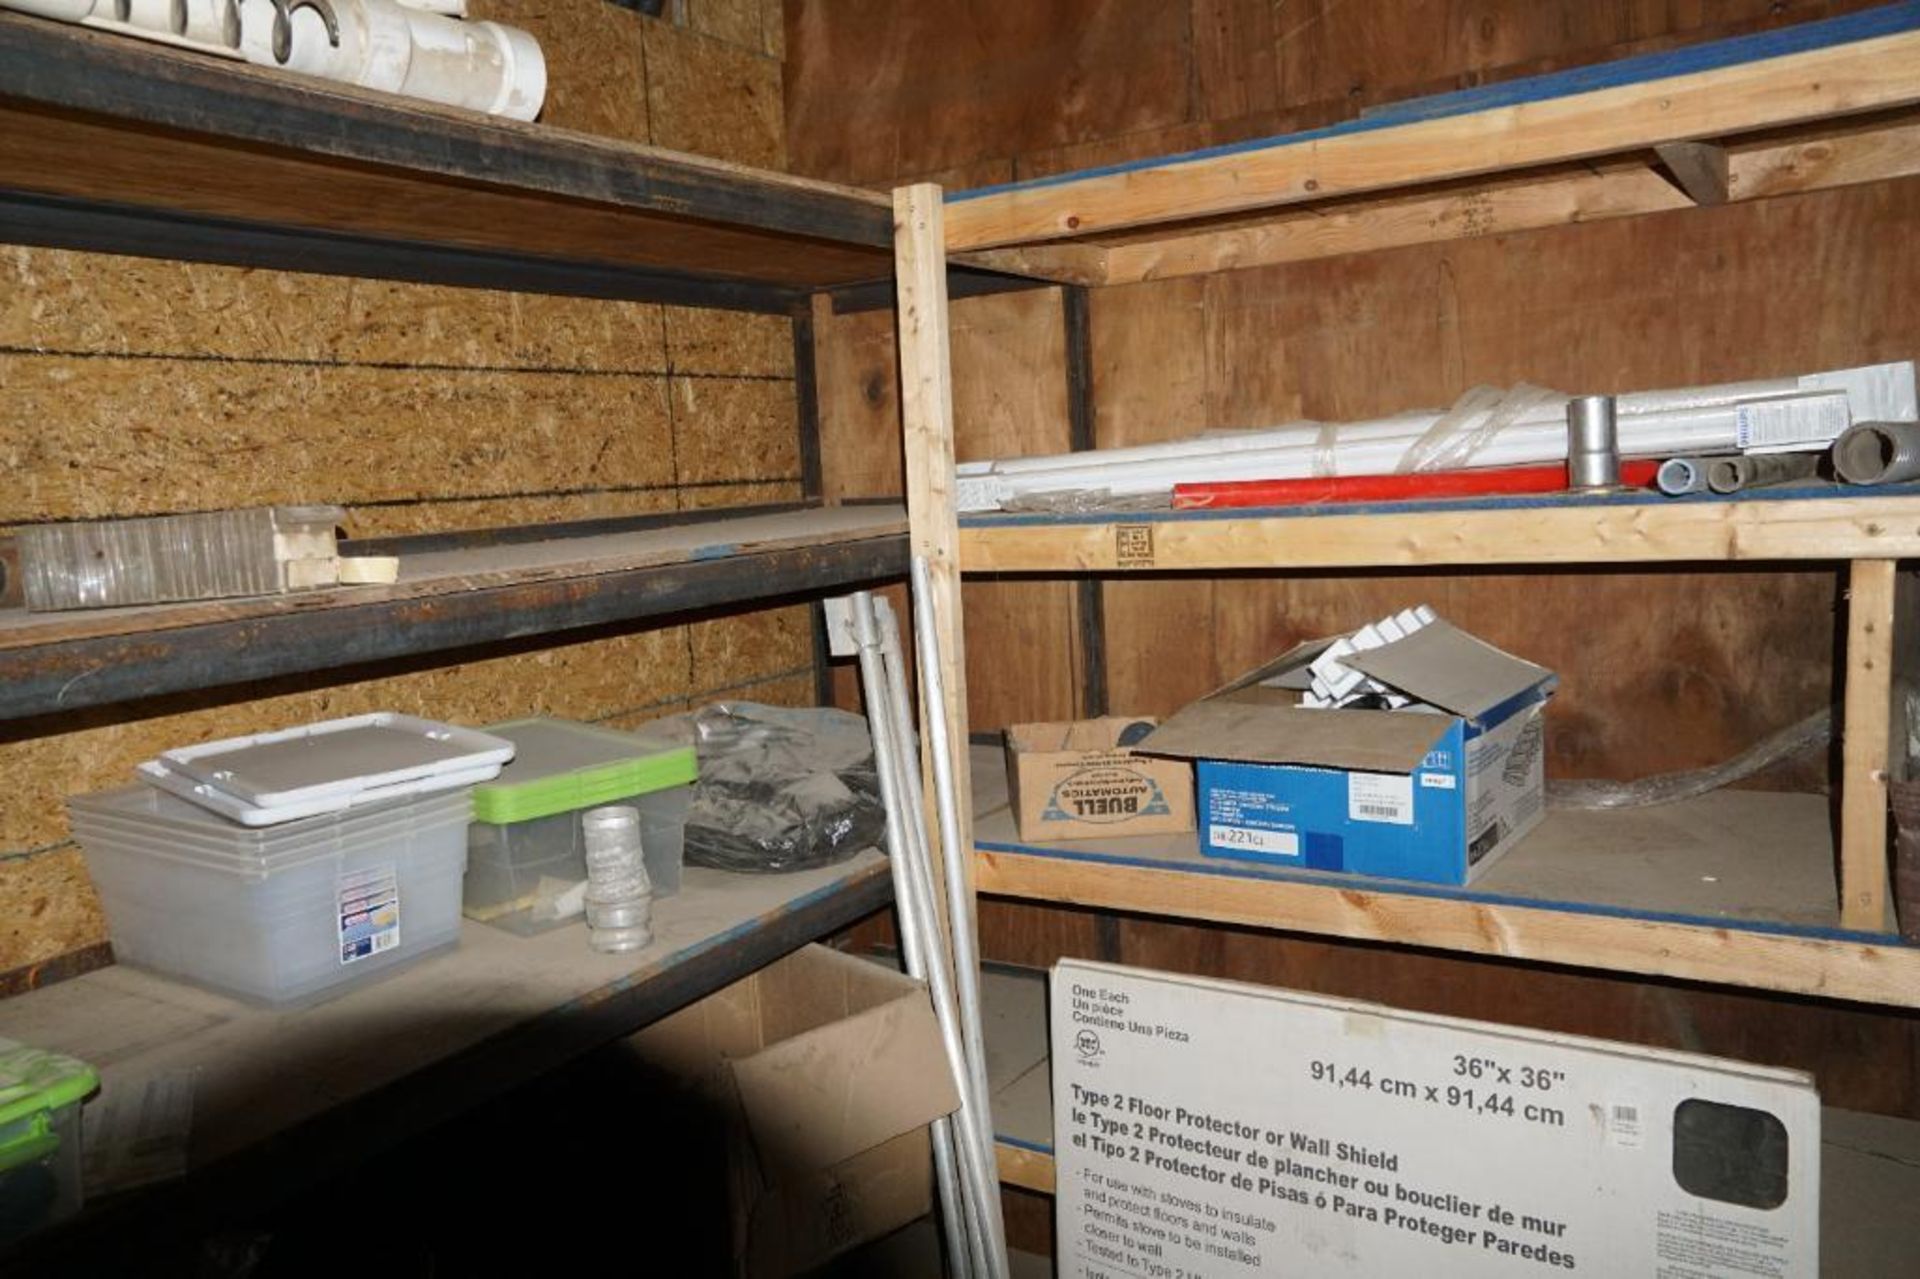 Shelves & Compression Couplers - Image 17 of 49